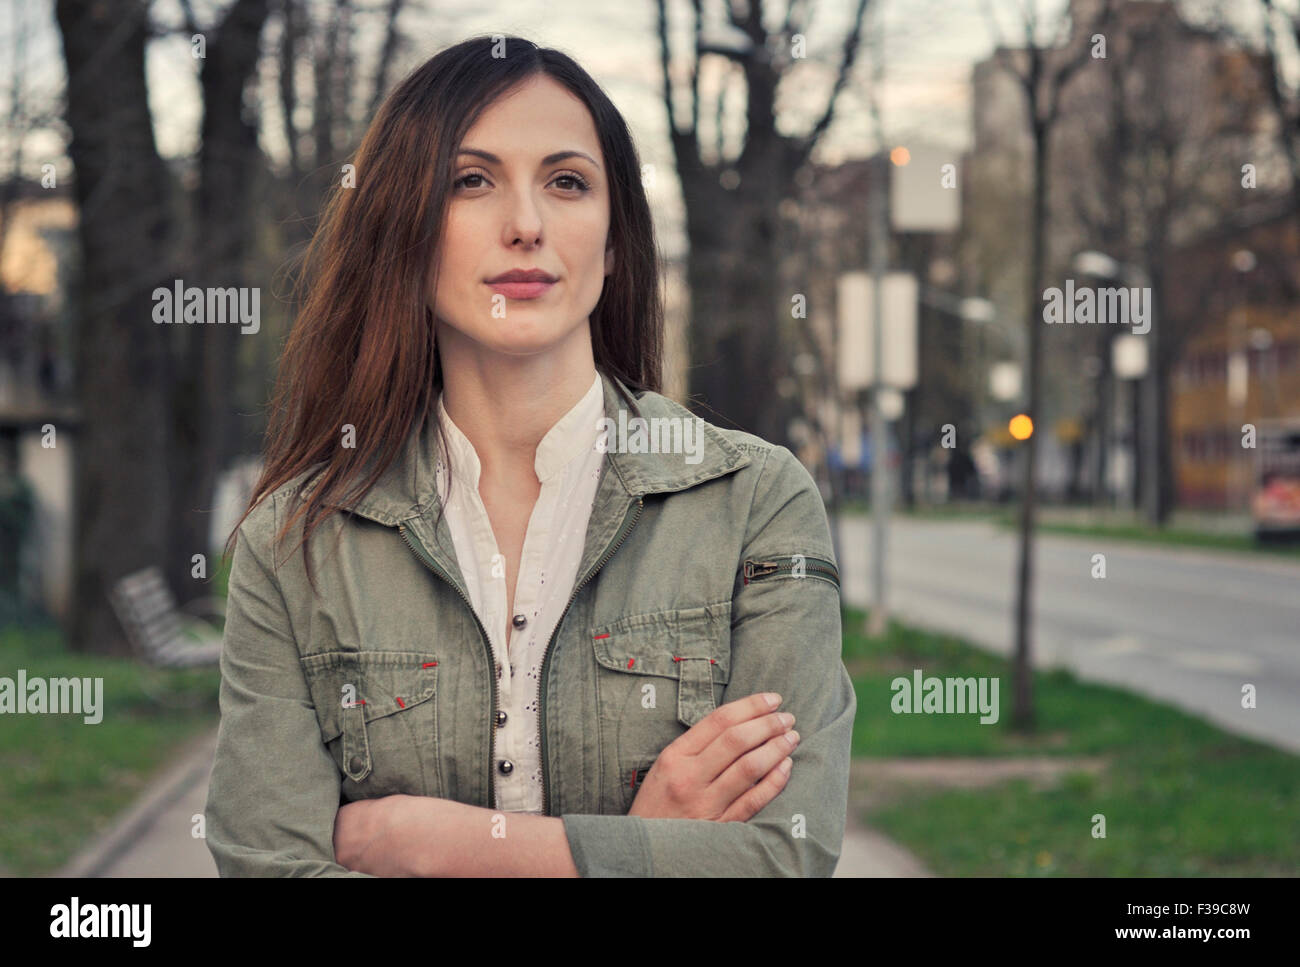 Portrait of a young confident woman on city street Stock Photo